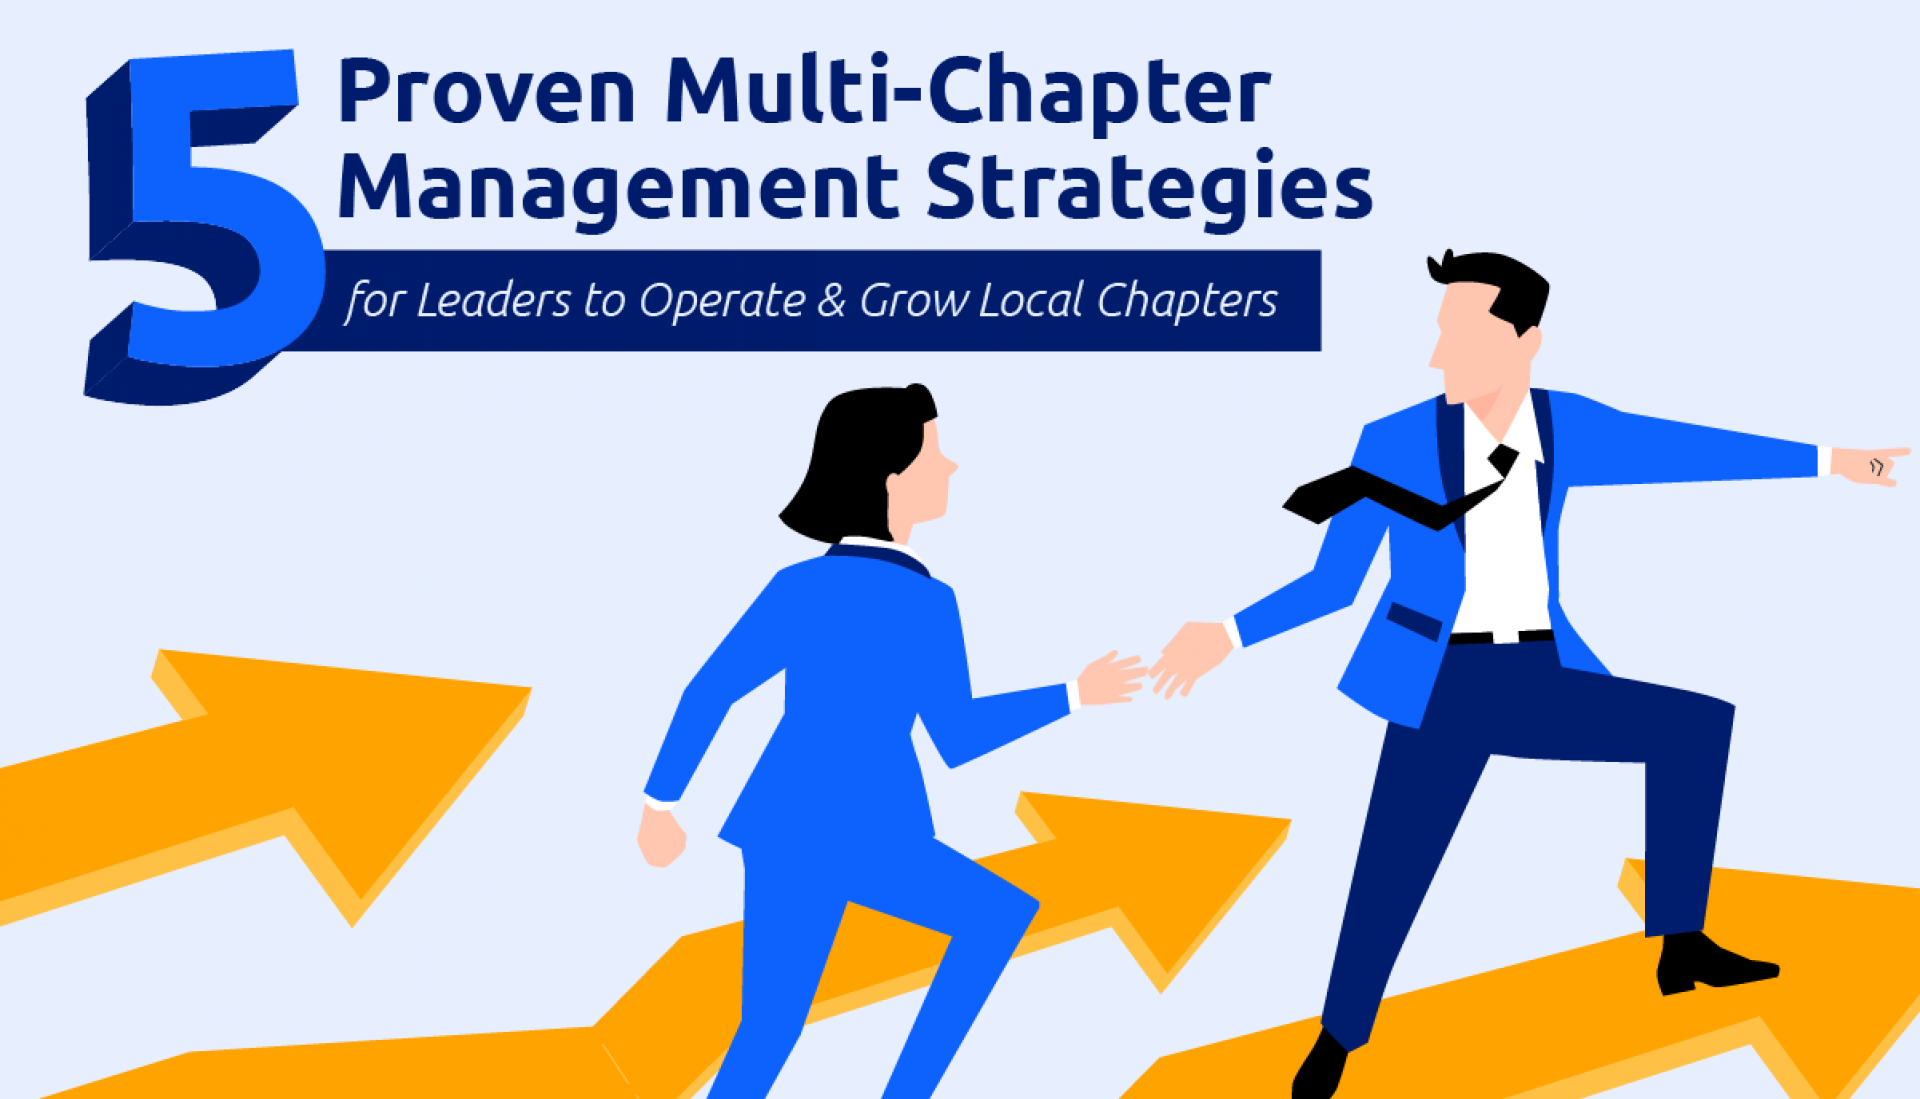 5 Proven Multi Chapter Management Strategies for Leaders to Operate & Grow Local Chapters